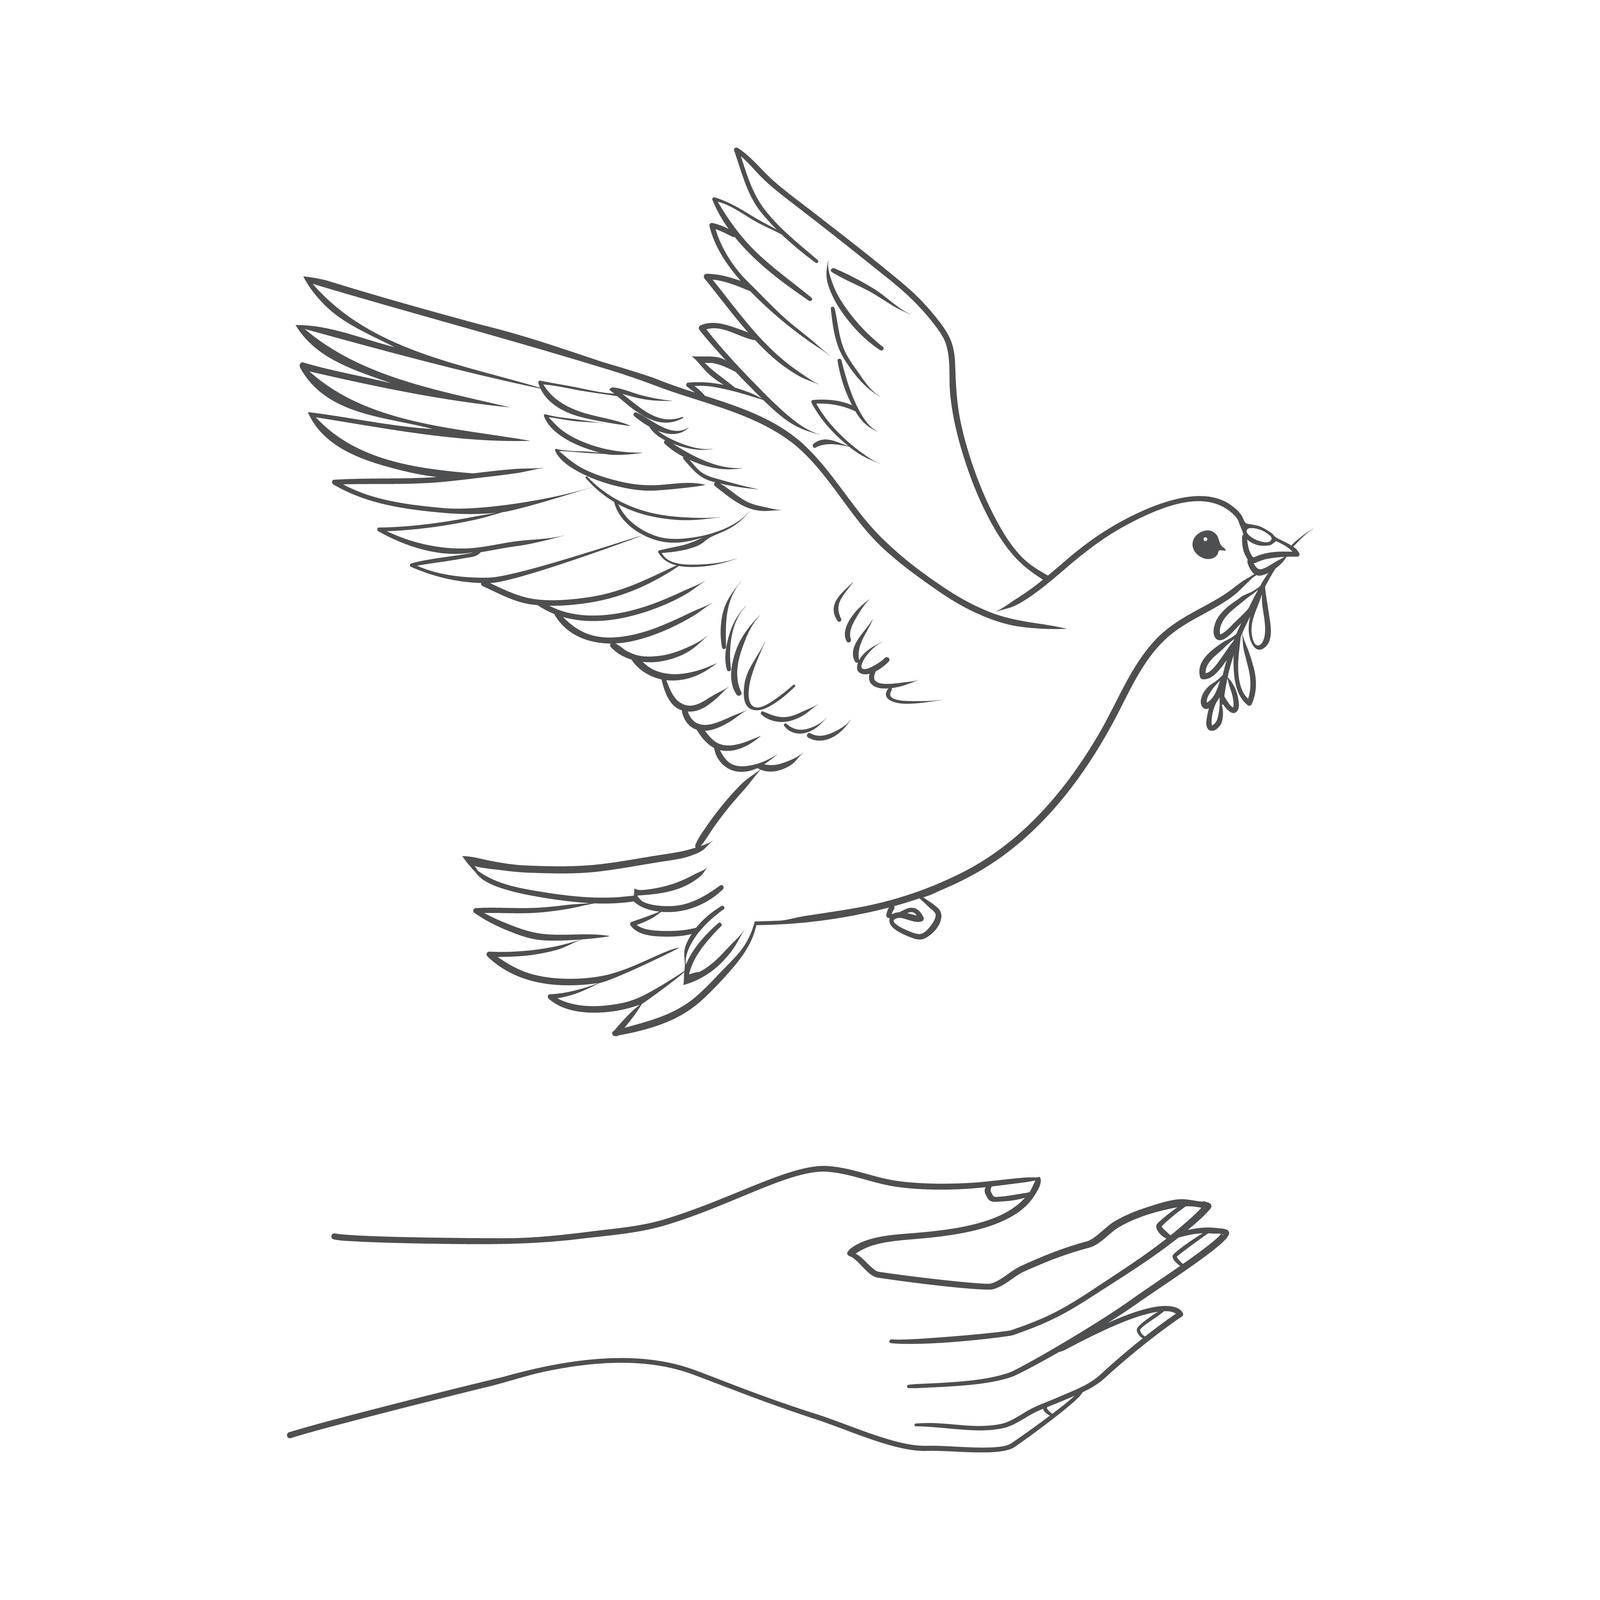 Peace dove with olive branch in the beak flying and hands down. Vector illustration